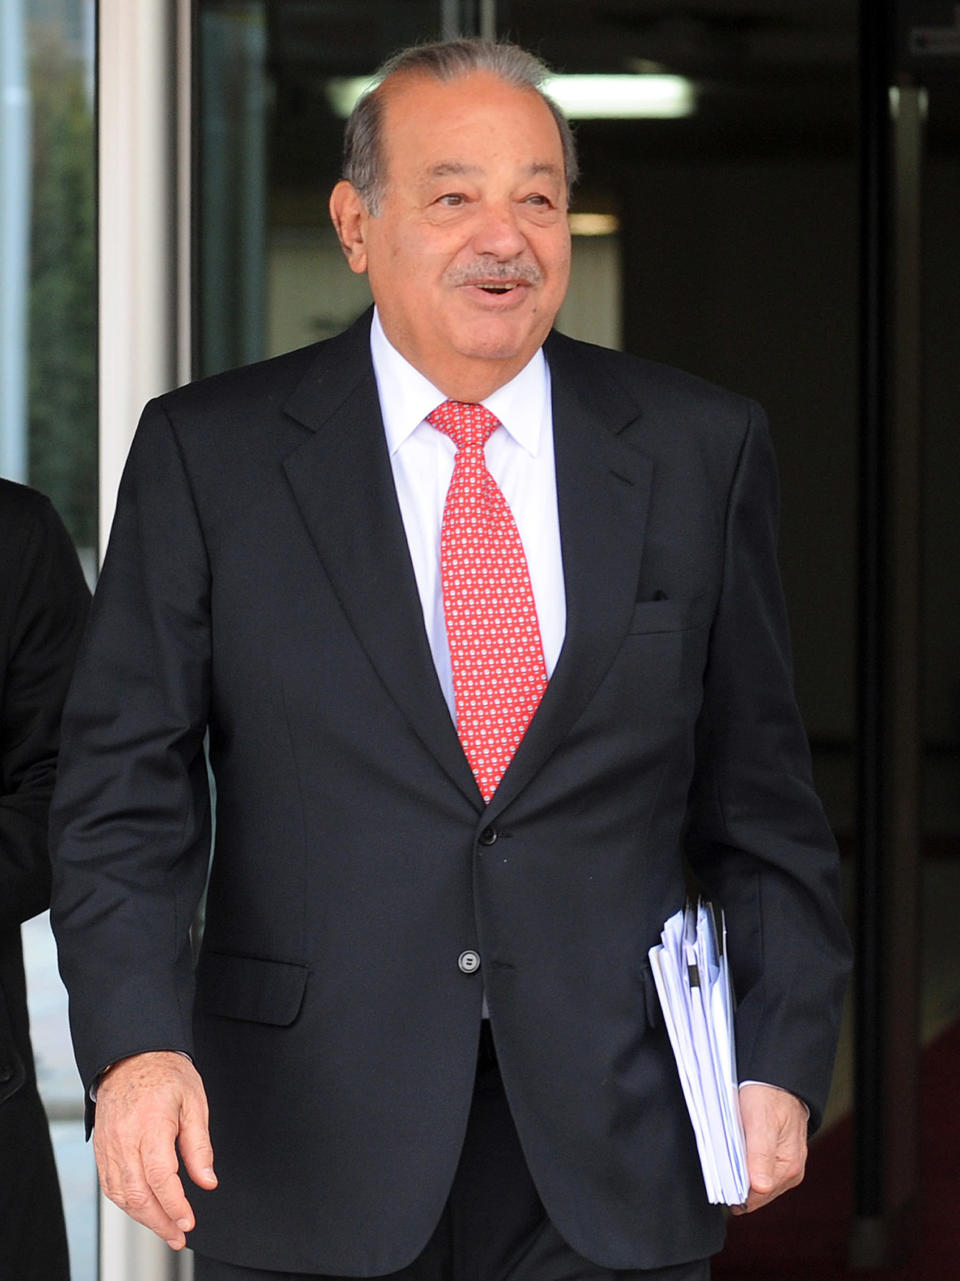 <p><b>1. Carlos Slim, 72</b></p> <p>Companies: Grupo Carso, Telmex, America Movil</p> <p>Net worth: $70 billion</p> <p>Compensation: N/A Carlos</p> <p>Slim has been the world’s richest man for the past three years, and his wealth is equivalent to nearly 6 percent of Mexico’s annual economic output.</p> <p>Slim is the Chairman and CEO at three of his companies: telecom giants Telmex and America Movil, which is the world’s third largest cellphone company by subscribers, and conglomerate Grupo Carso. Mexico-born Slim, who is of Lebanese descent, studied engineering before starting his own company in 1965, which would later be known as Grupo Carso. Slim continued to build his empire by purchasing troubled companies and turning them around. He also has stakes in some well-known North American names like the New York Times, and retailer Saks.</p> <p>The majority of Slim’s wealth comes from his stake in Grupo Carso, which is estimated to be worth $60.5 billion, according to Wealth-X. He is well-known for his art collection, which is valued at $700 million. Slim is believed to have the largest number of sculptures by Auguste Rodin outside of France, which is displayed in a newly built museum in Mexico City, named after his late wife Soumaya.</p> <p>Despite his status as the world’s wealthiest man, Slim is known to live in a modest six-bedroom house in Mexico City and drives himself to work , with his bodyguards following closely.</p> <p>Slim retained the title of the world’s richest man in 2012, but his net worth declined $5 billion from 2010.</p>